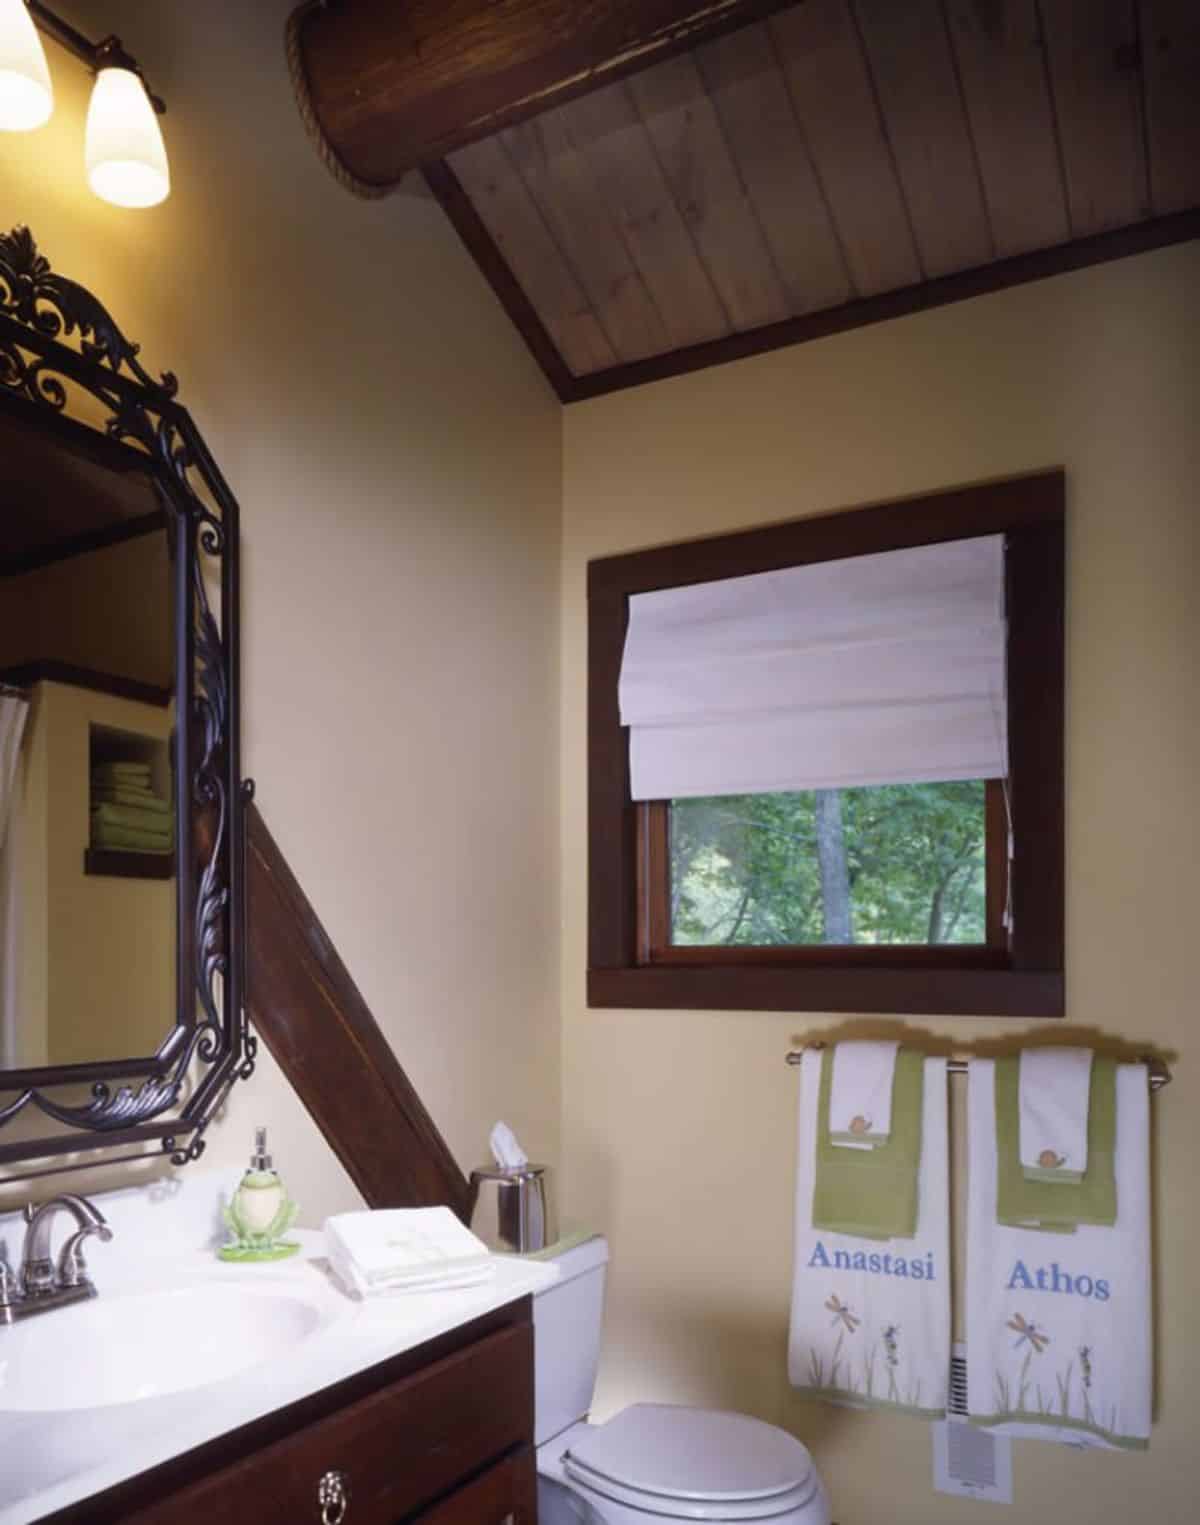 view into bathroom with mirror on wall to left above white sink